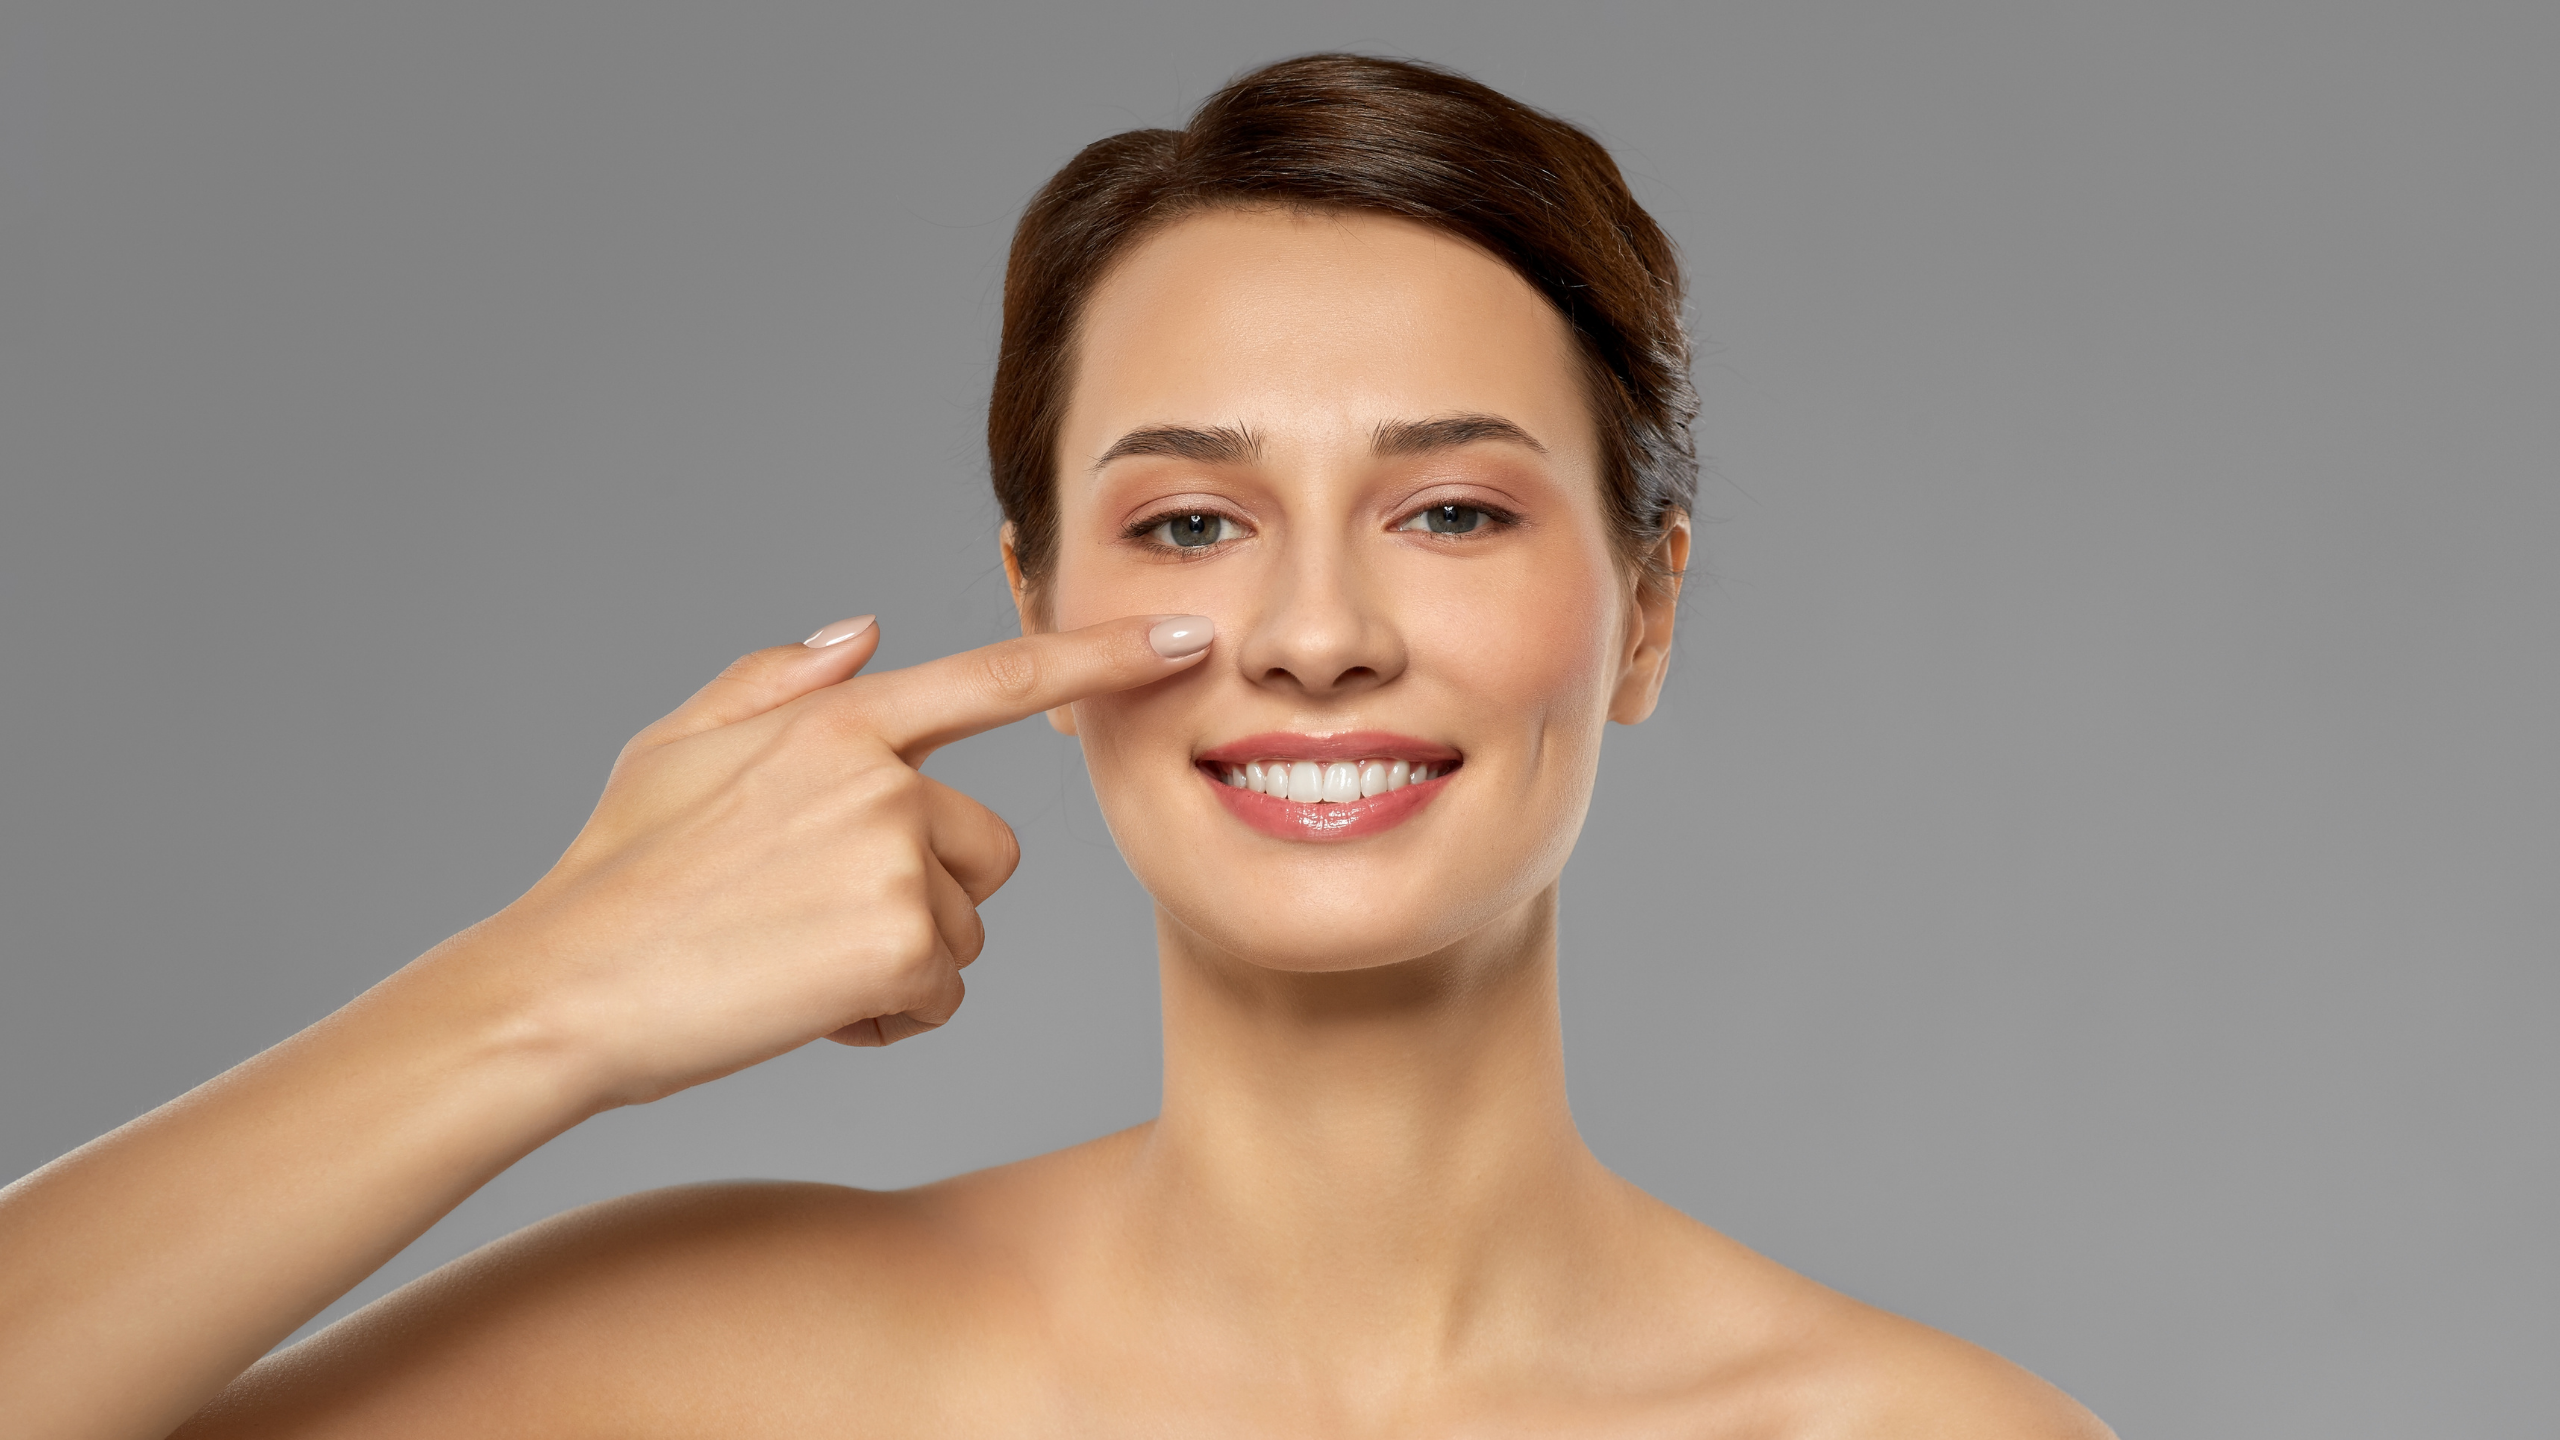 How to Pick A Nose Job Surgeon